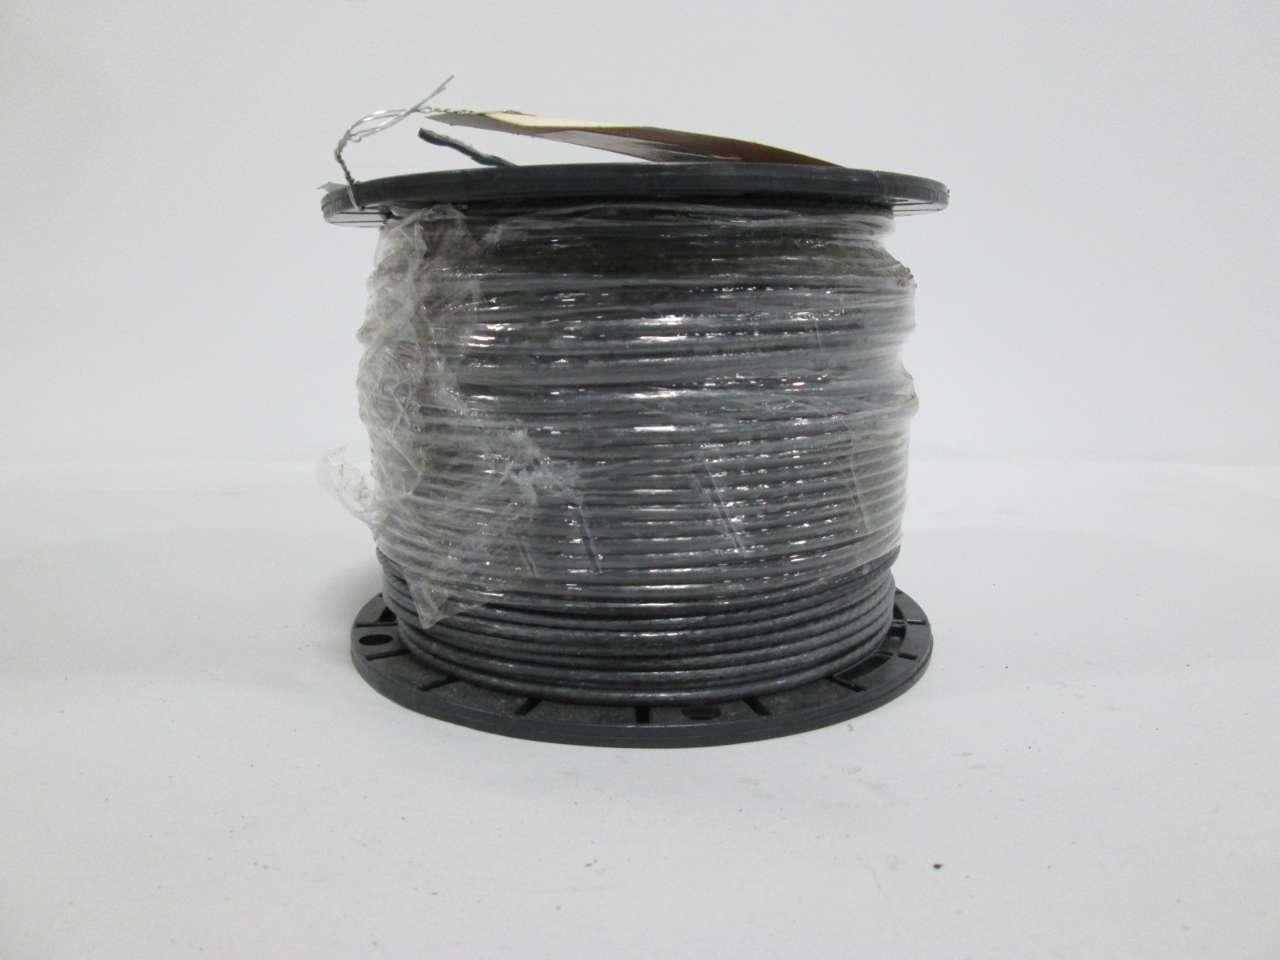 oncor wire